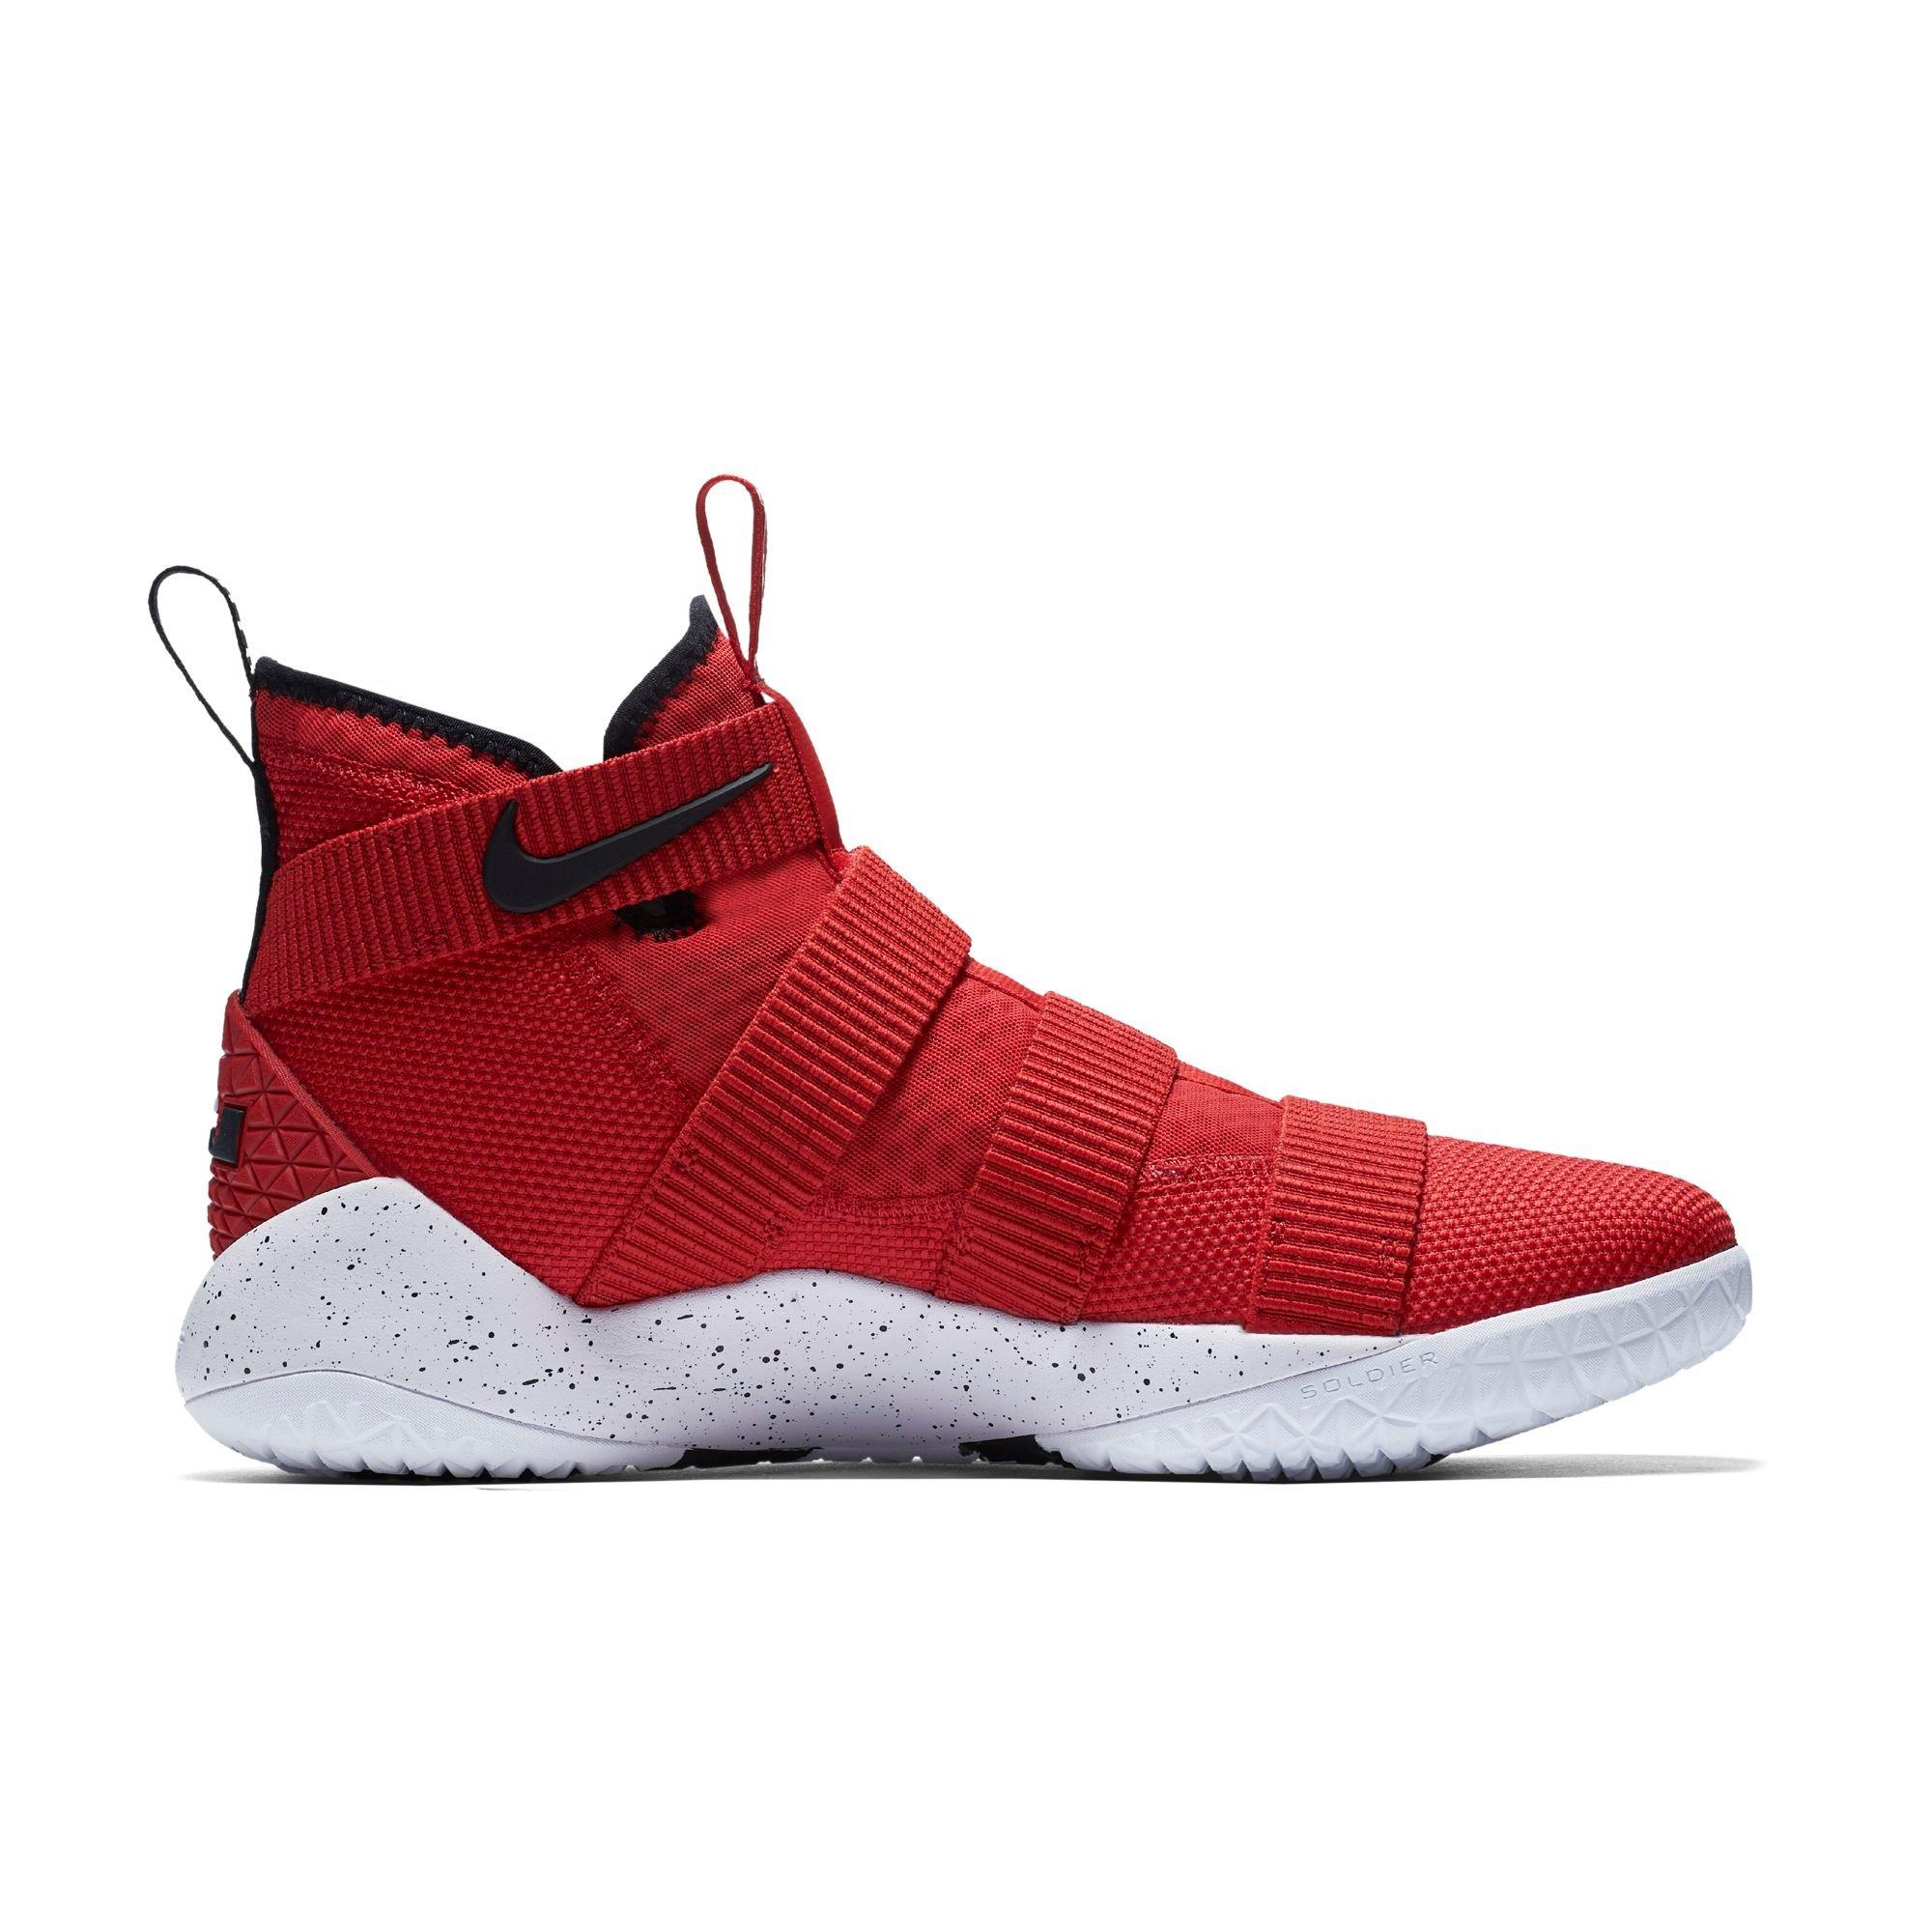 lebron soldier 11 red and white